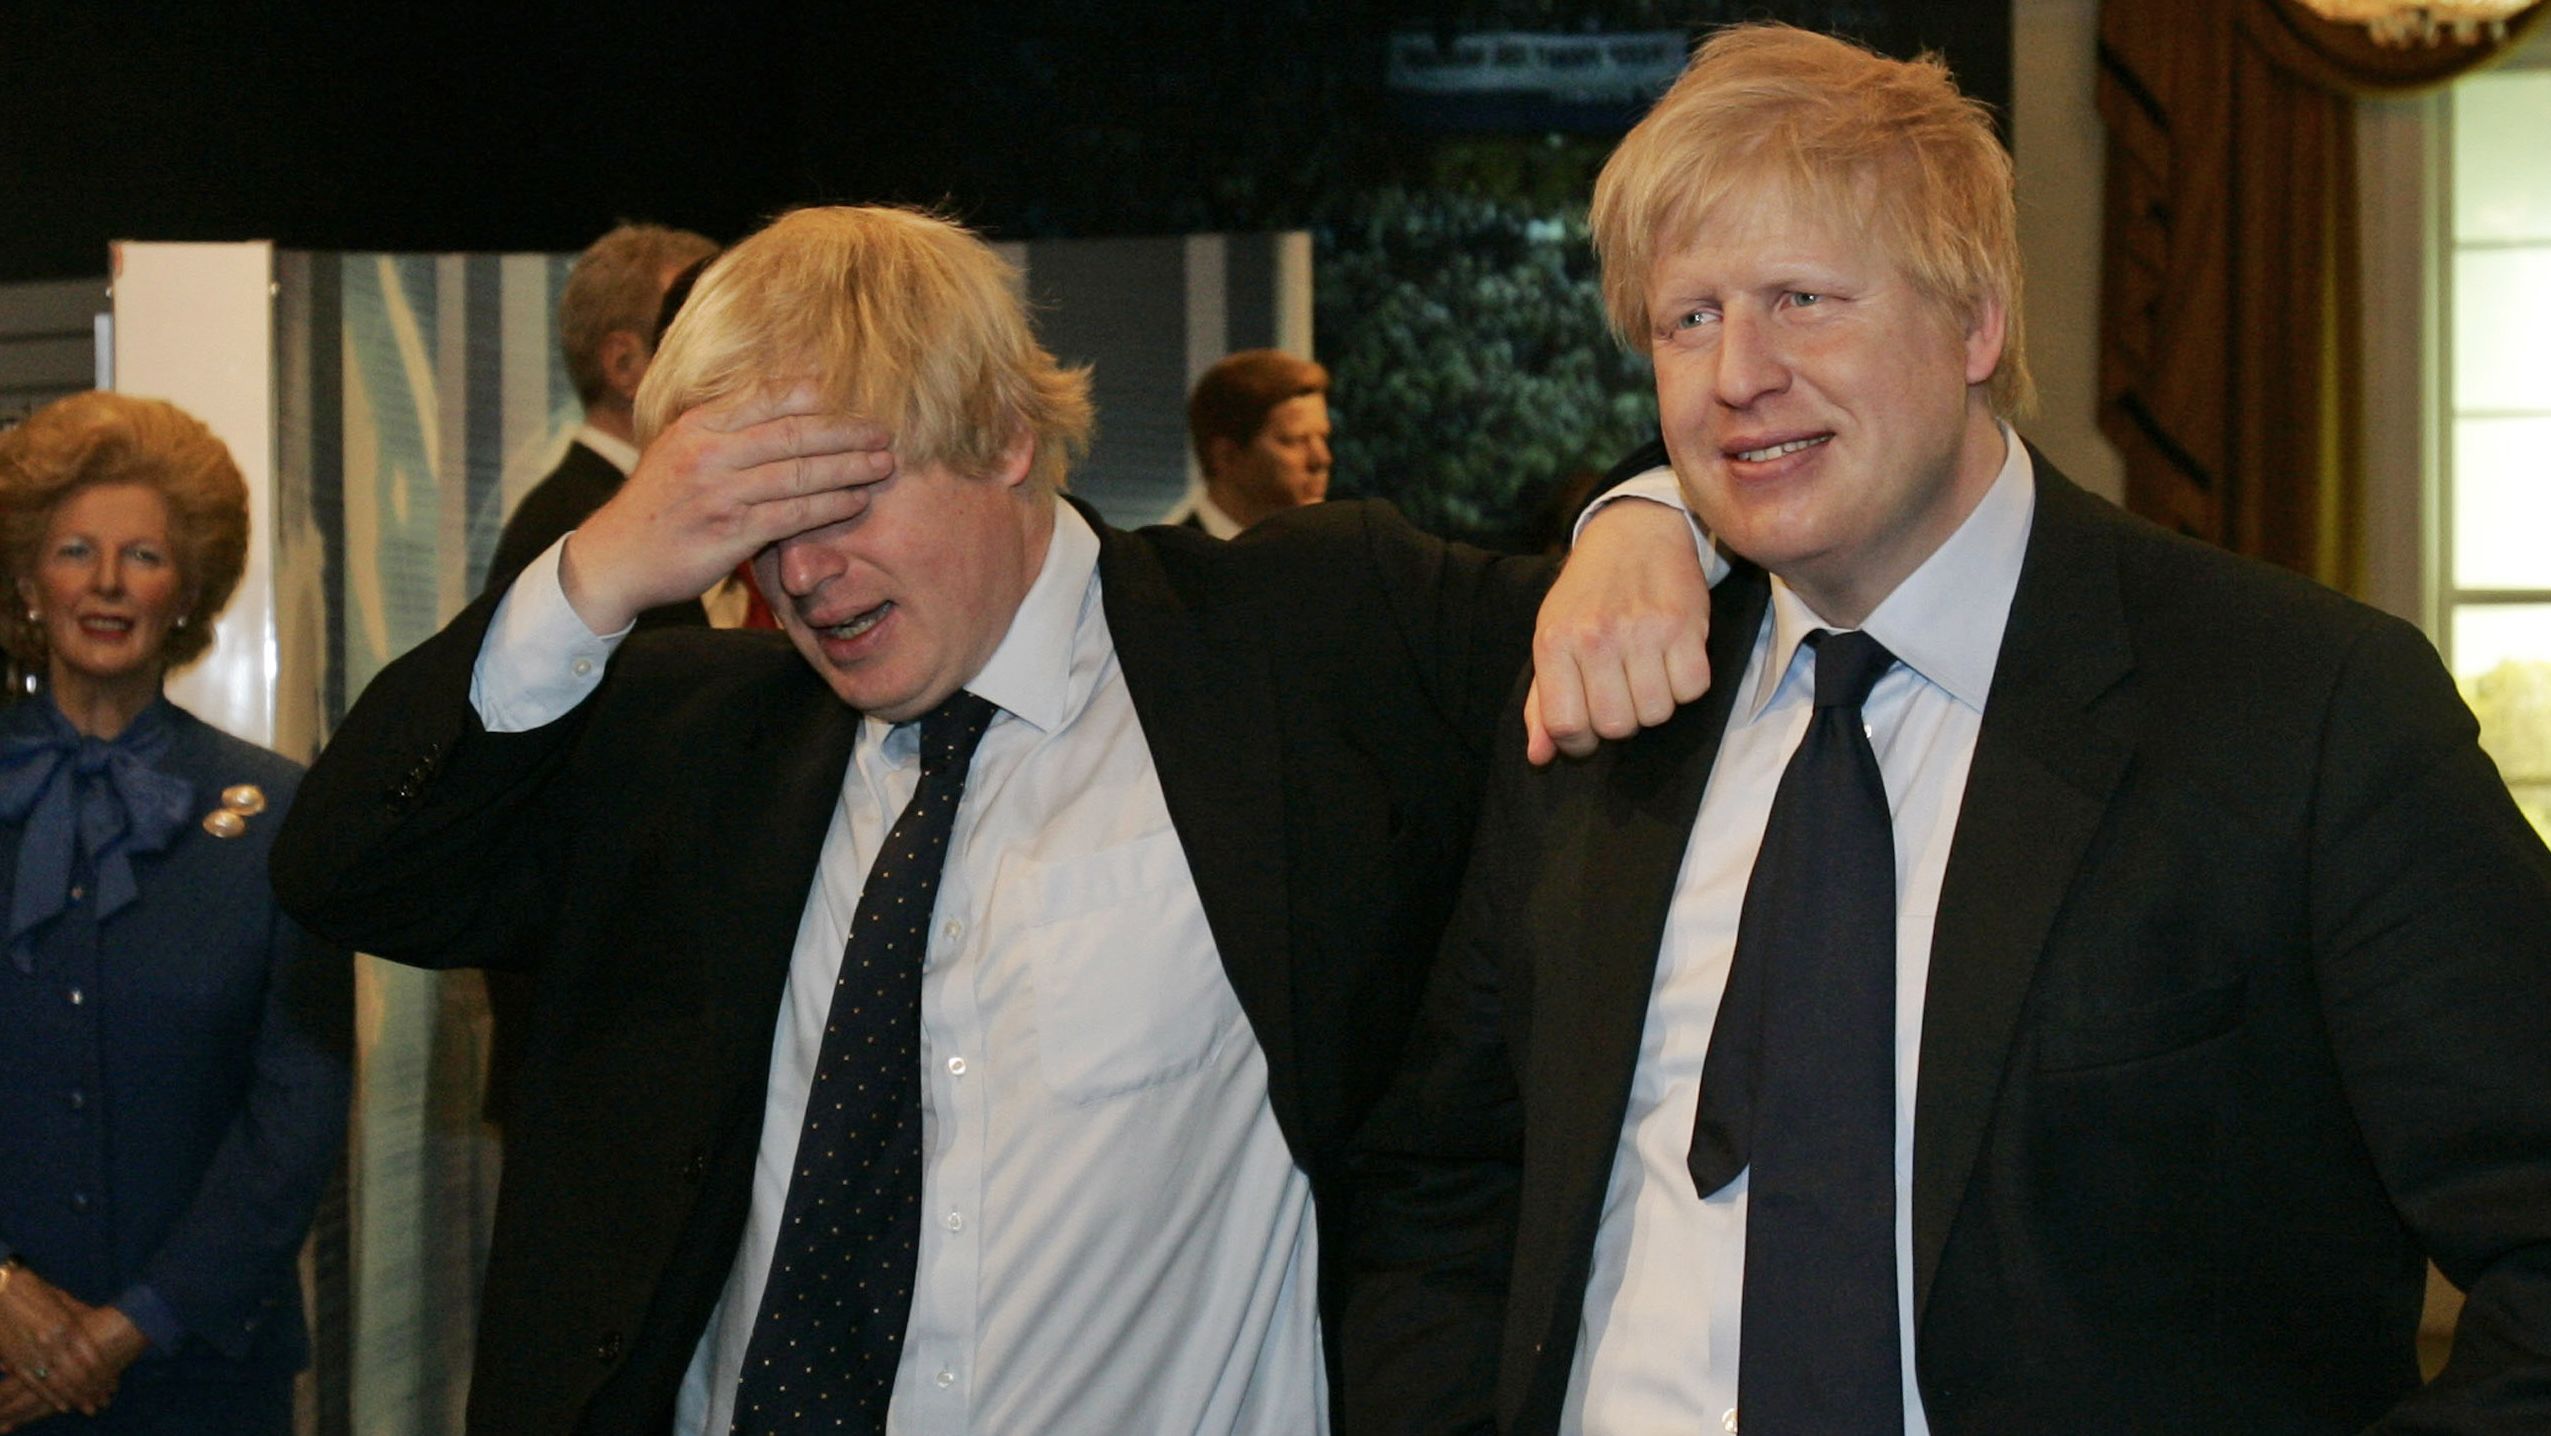 Johnson, left, poses with a wax figure of himself at Madame Tussauds in London in May 2009.